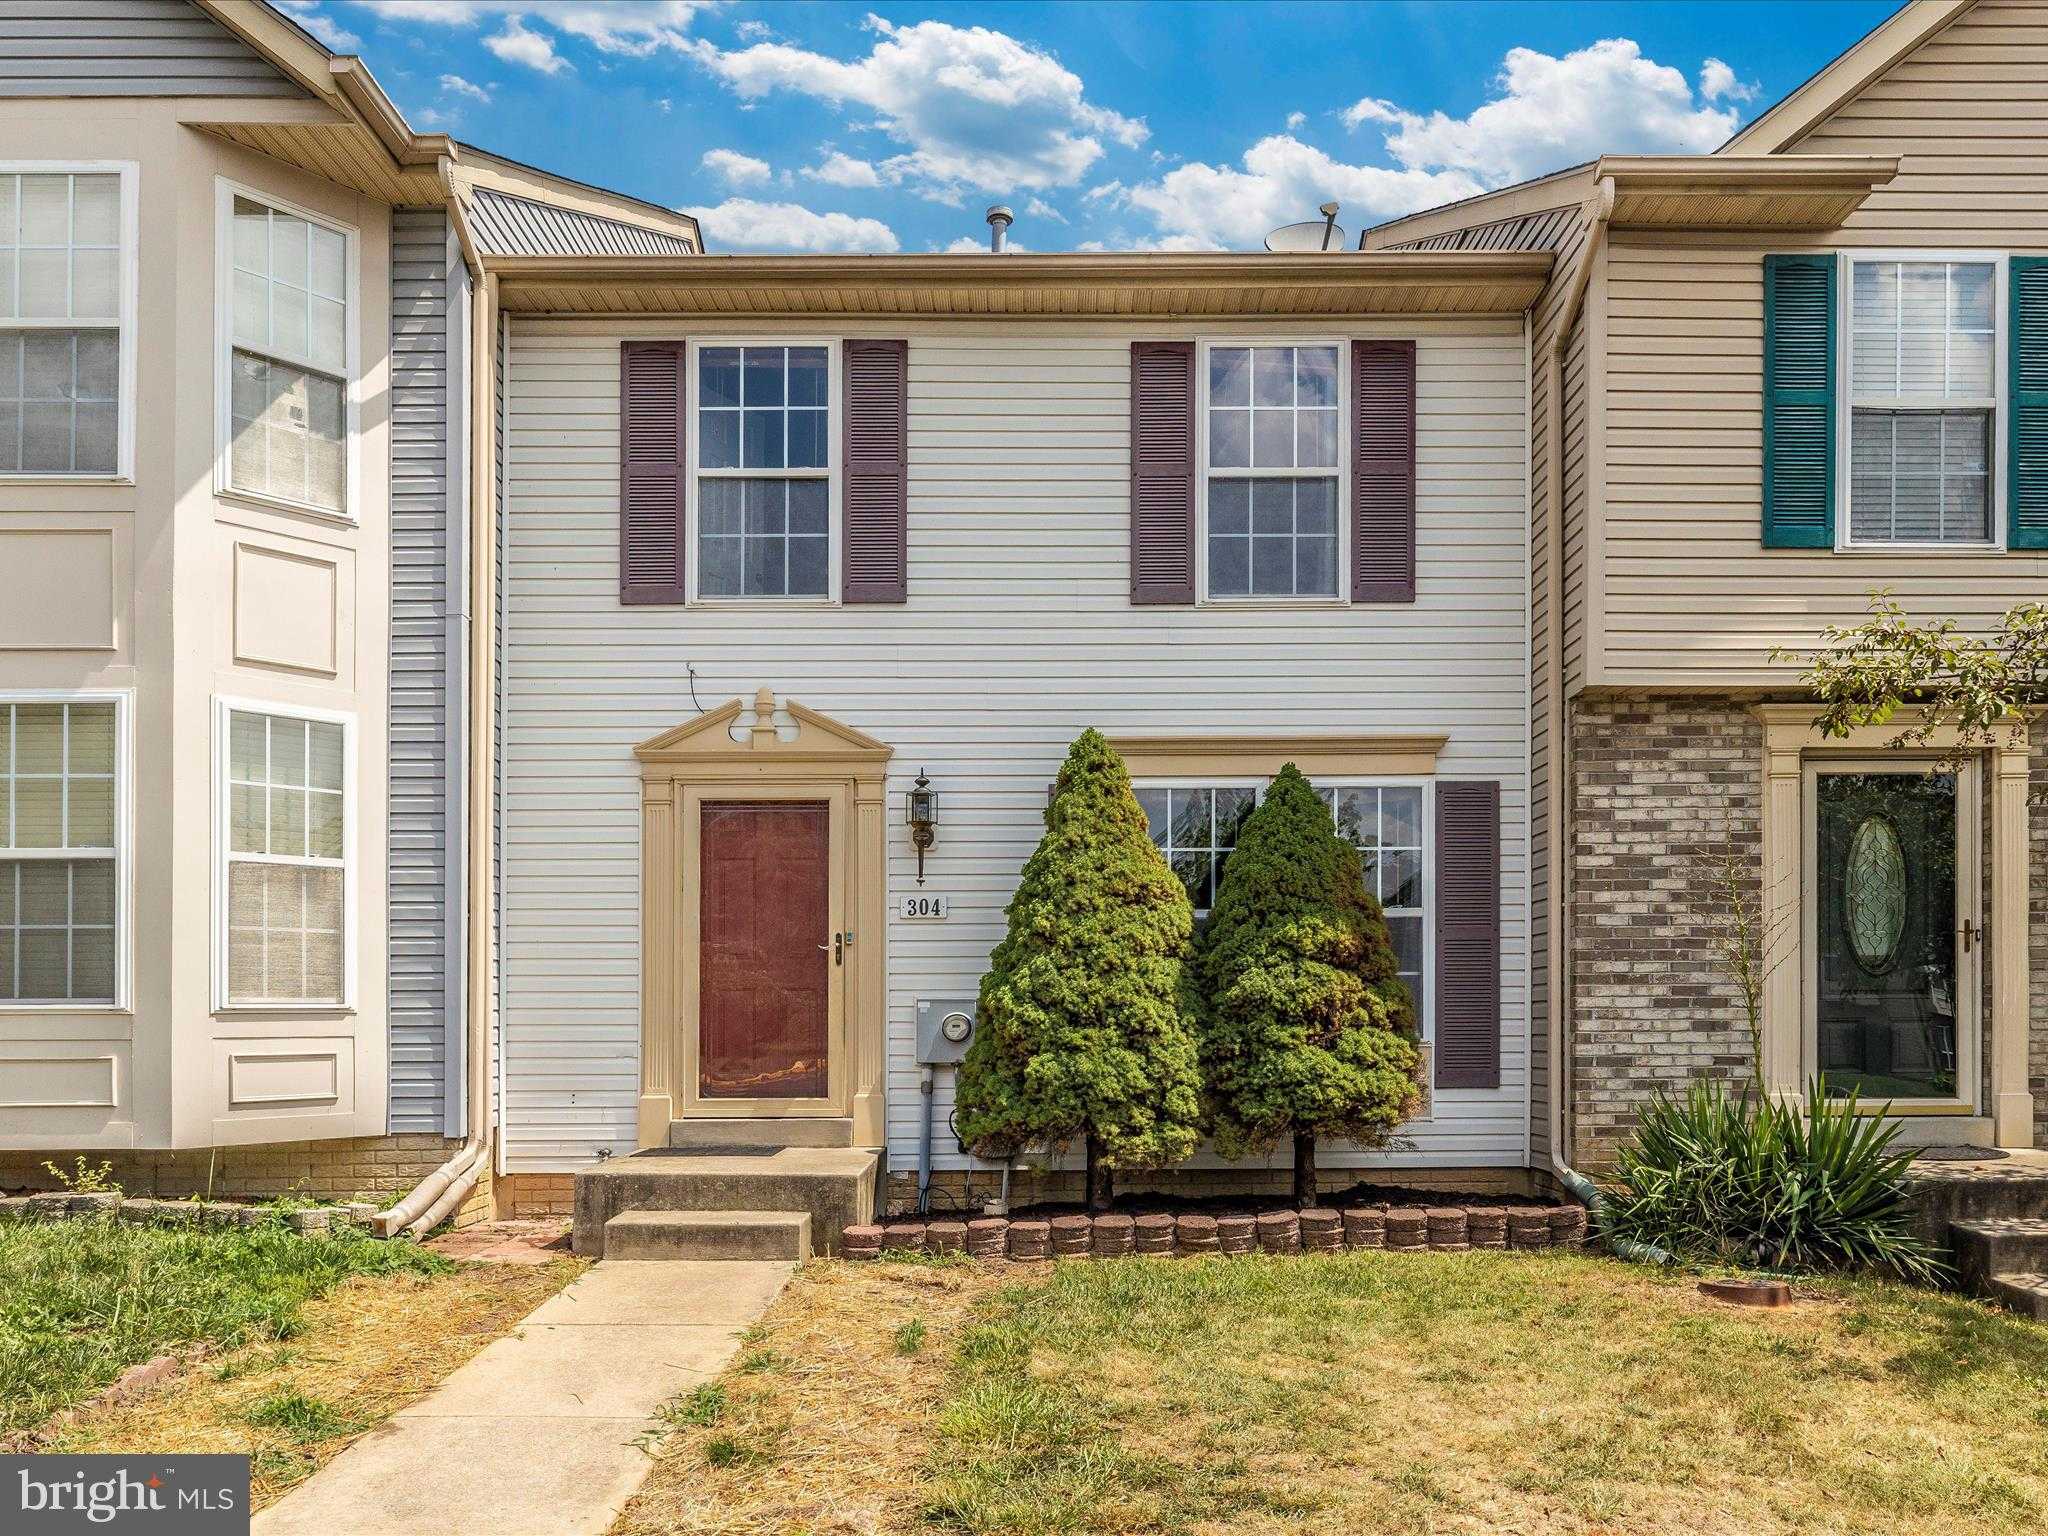 View THURMONT, MD 21788 townhome